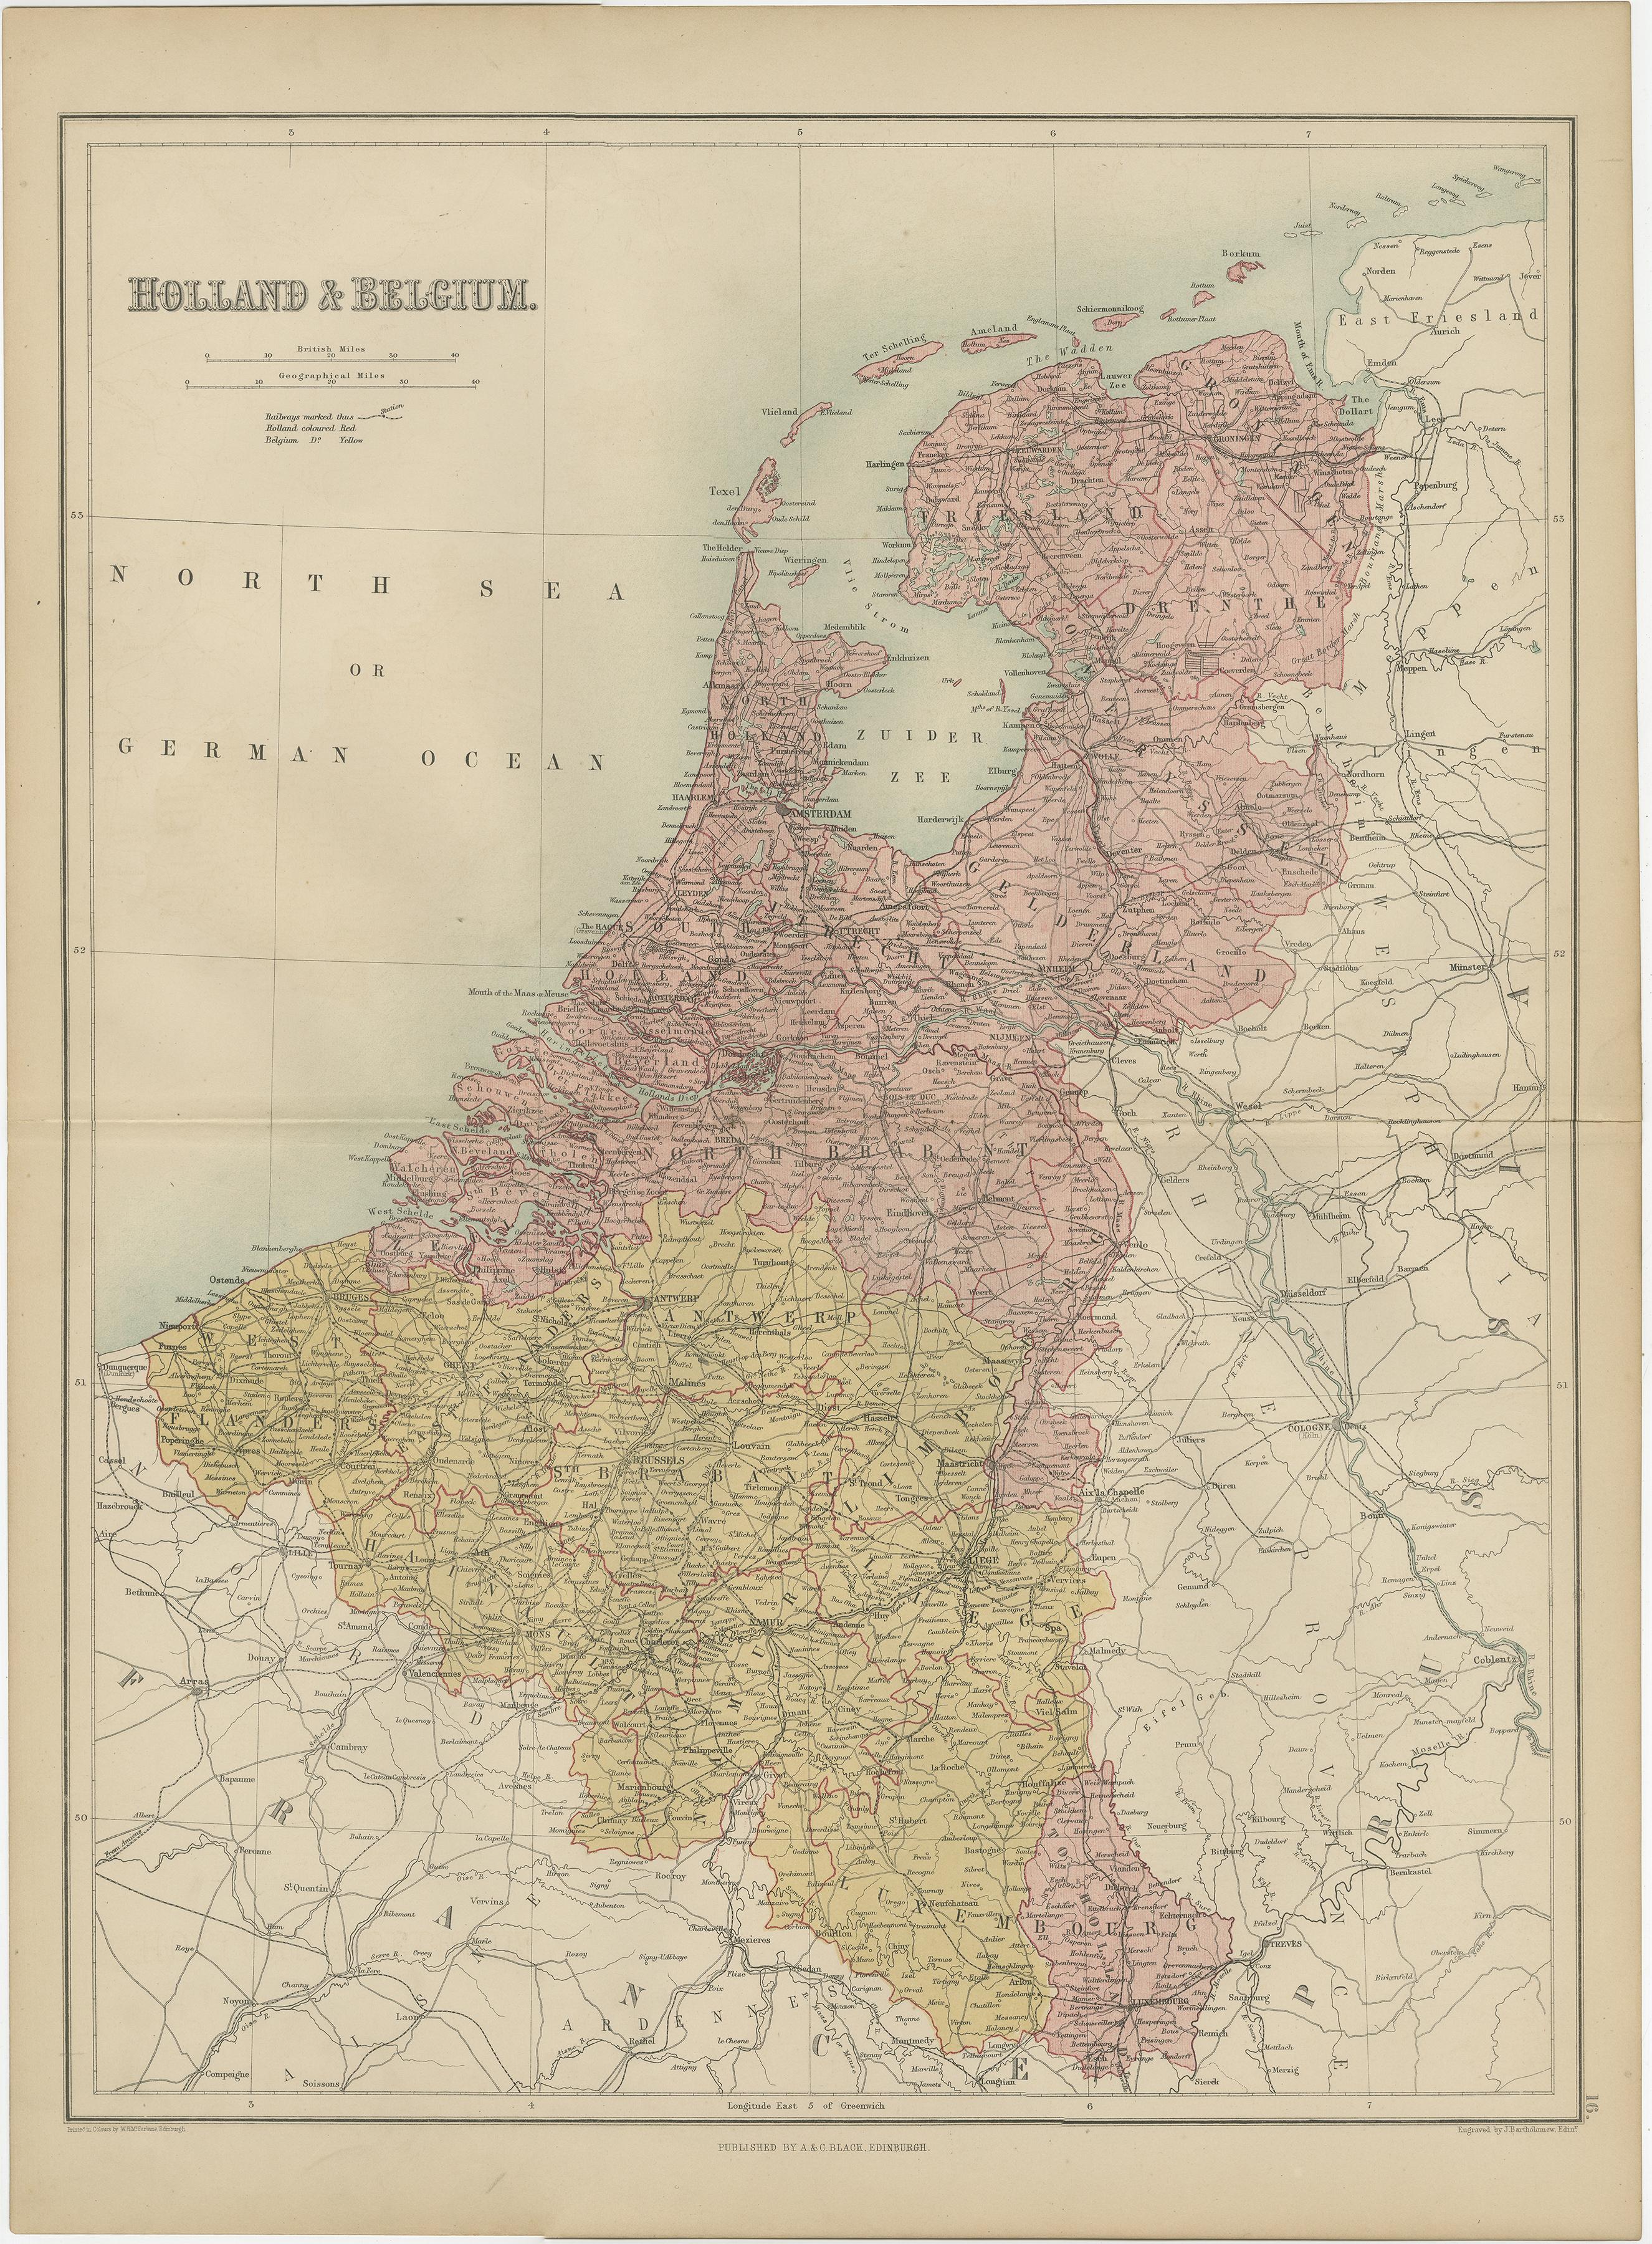 Antique map titled 'Holland & Belgium'. Original antique map of Map of The Netherlands and Belgium. This map originates from ‘Black's General Atlas of The World’. Published by A & C. Black, 1870.